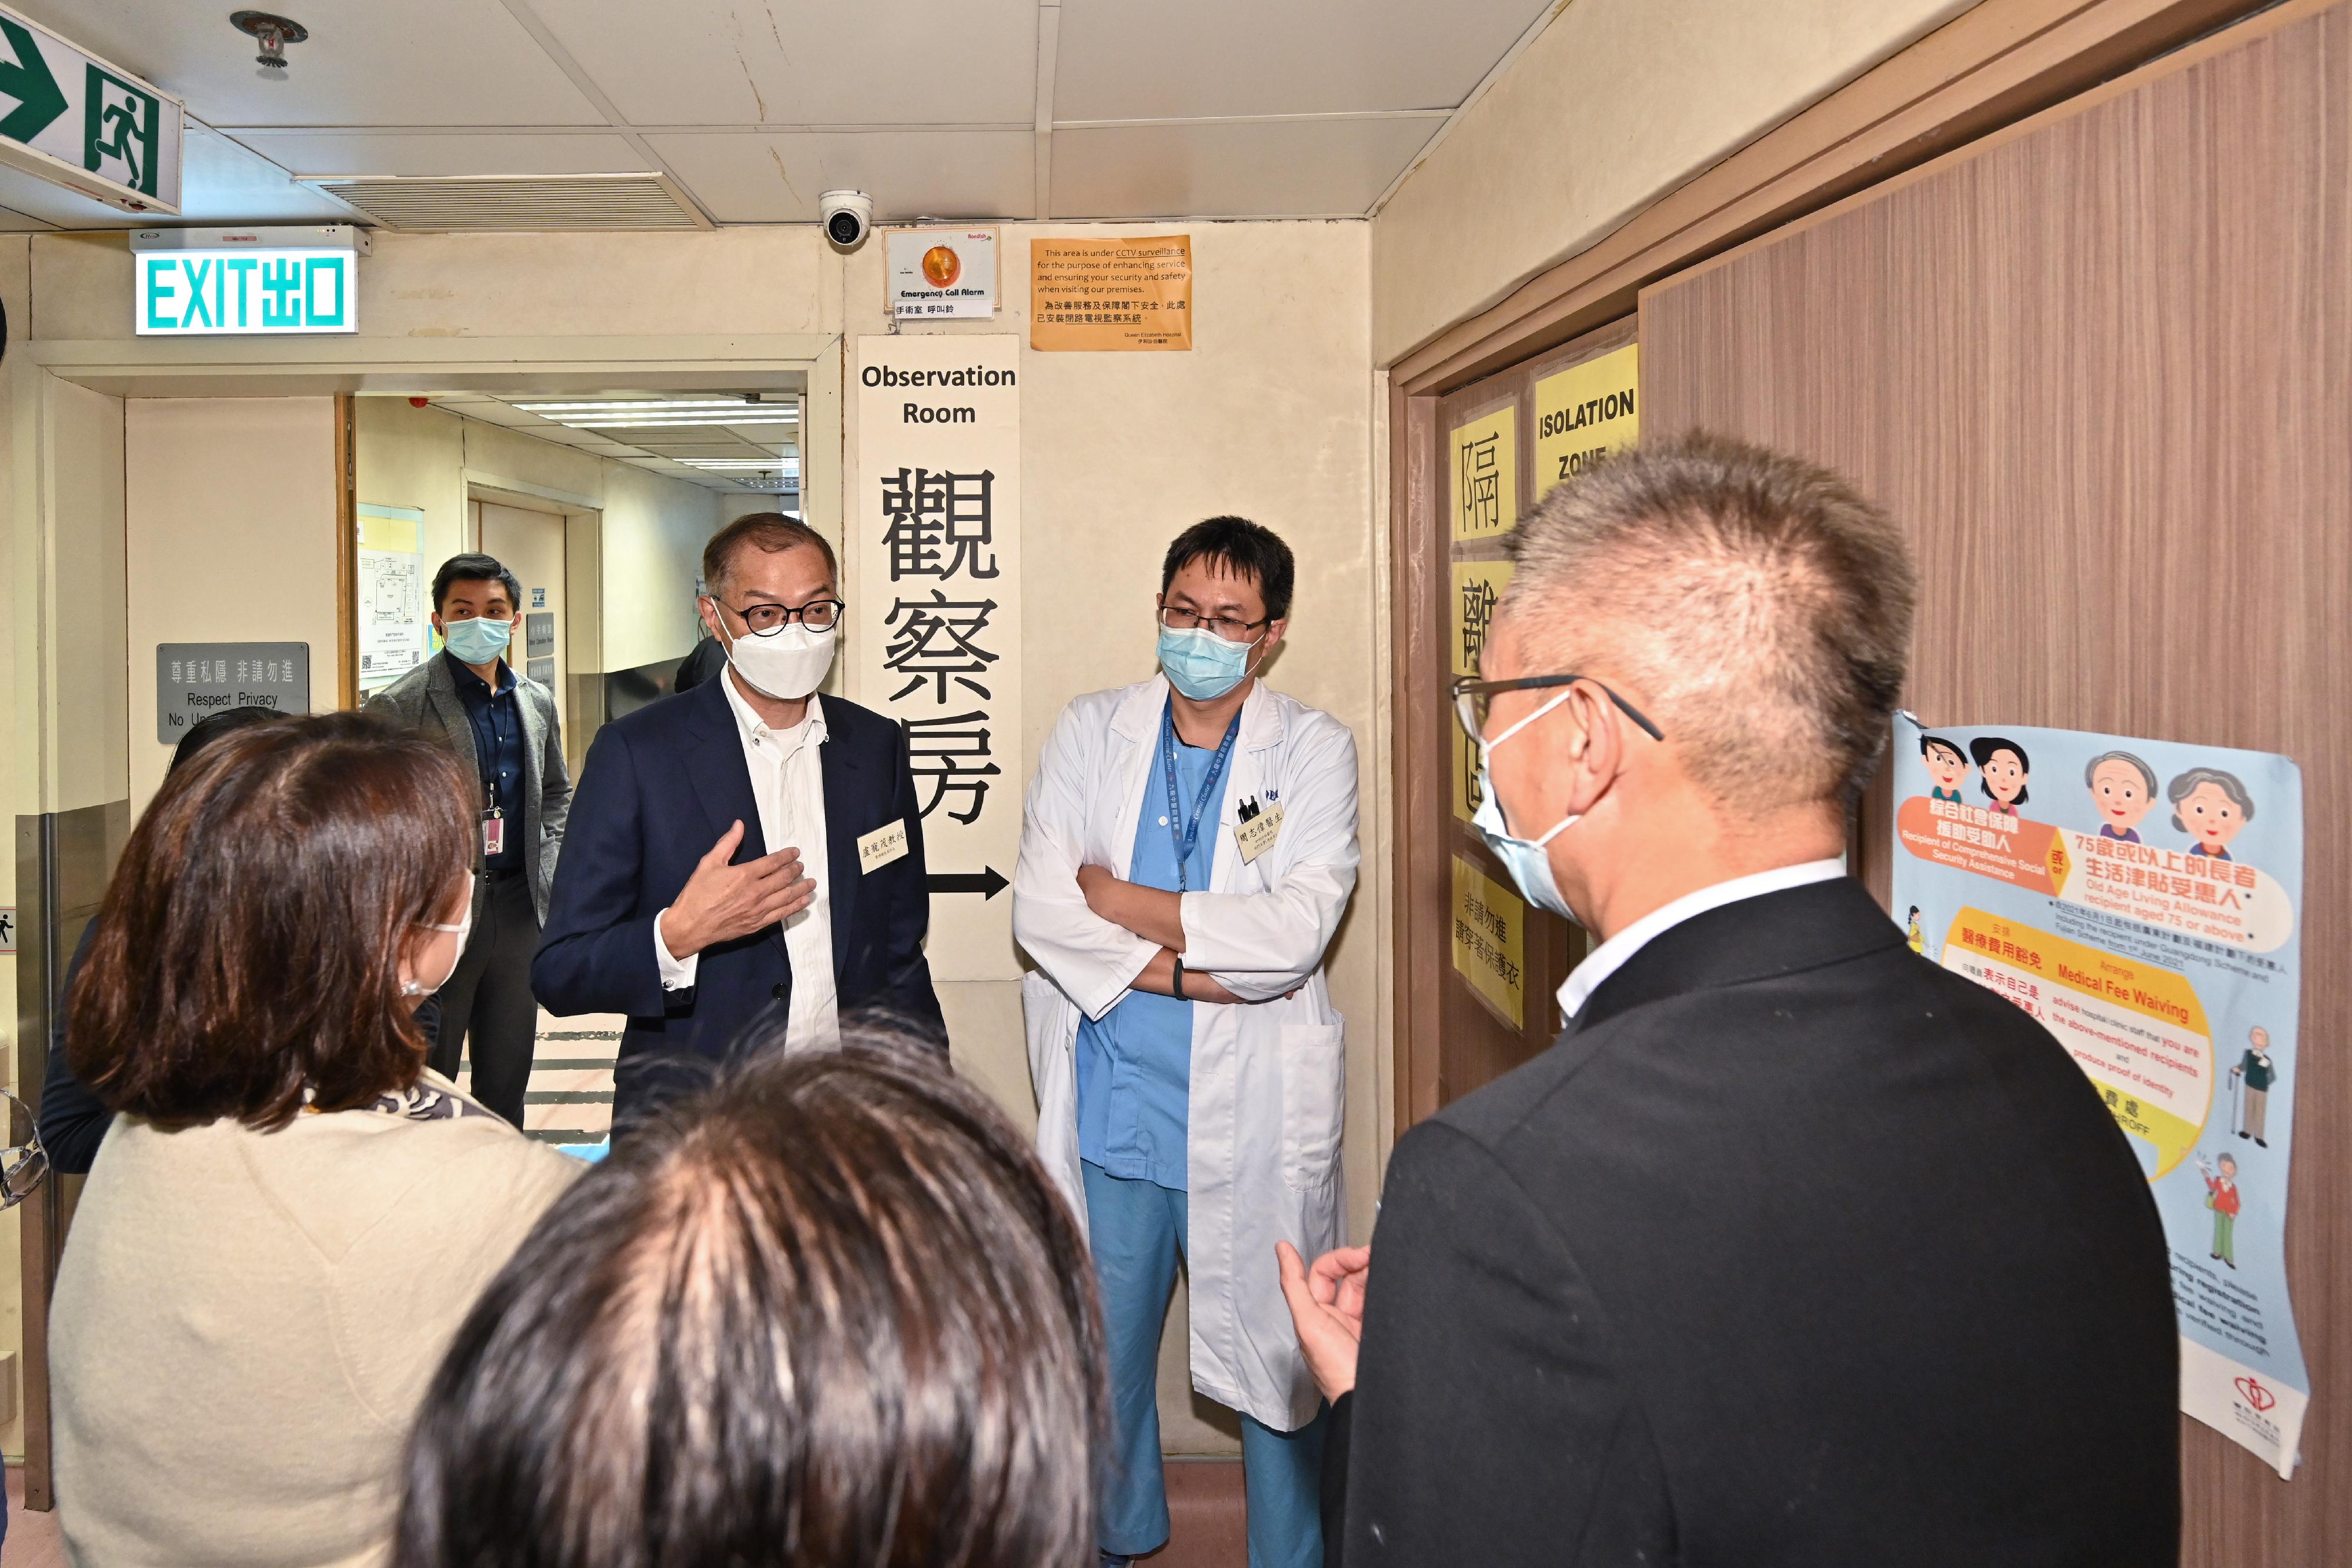 The Secretary for Health, Professor Lo Chung-mau (left), visited Queen Elizabeth Hospital today (January 3) to inspect the Accident and Emergency Department and get a grasp on the operation of public hospitals during the service surge. Professor Lo expressed his gratitude to frontline healthcare staff for their efforts and contributions.